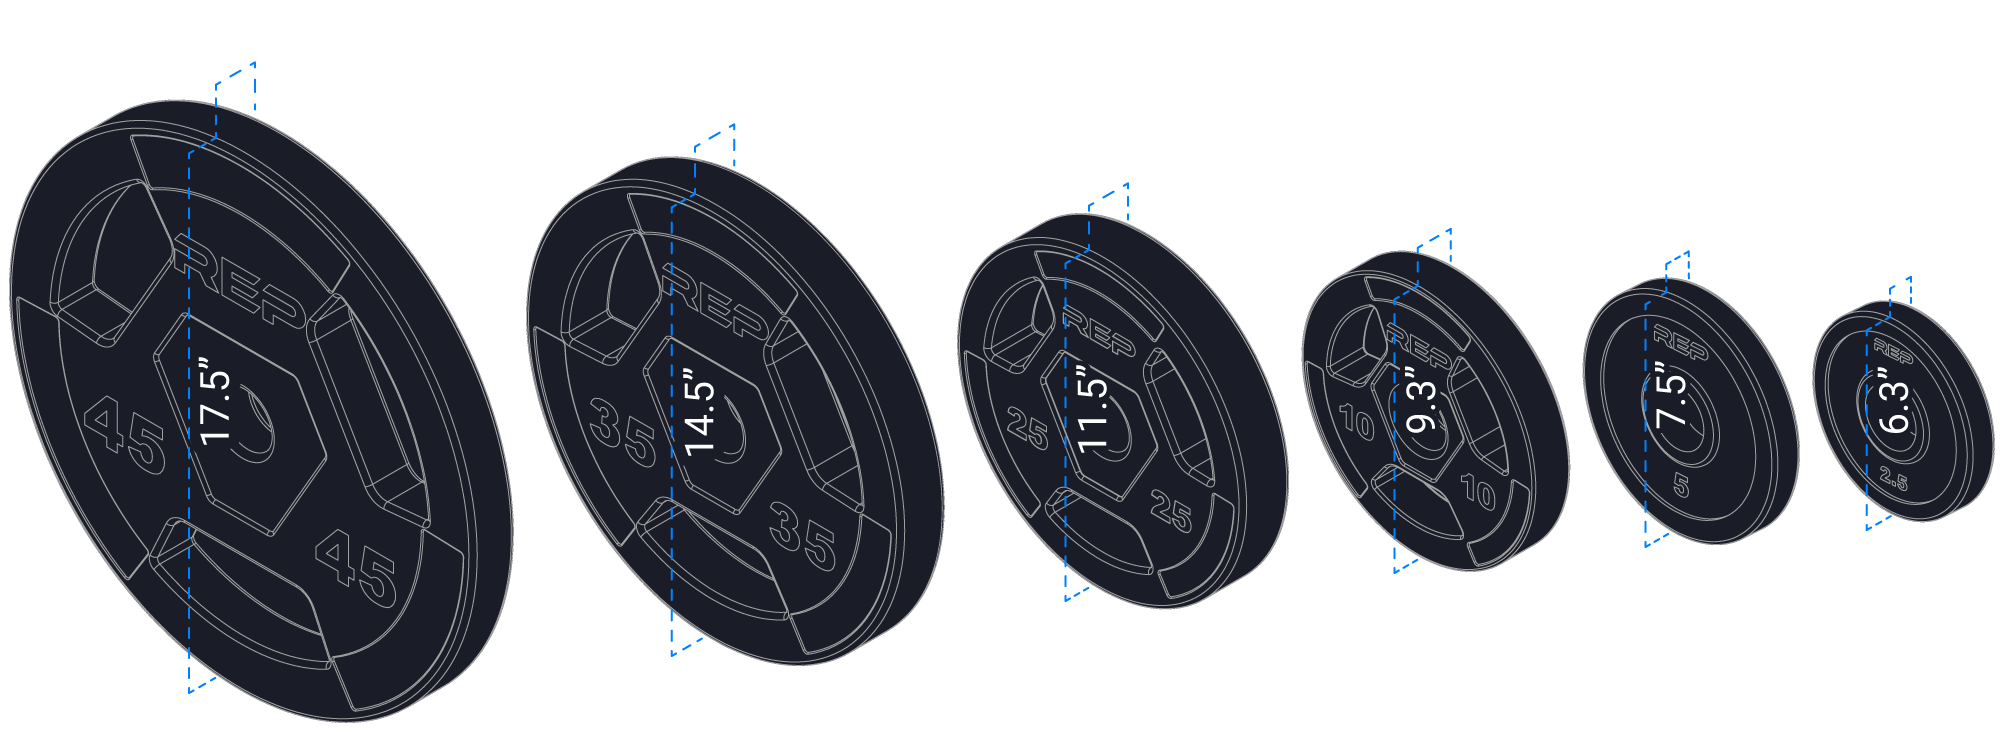 Rubber Coated Olympic Plate Sets Informational